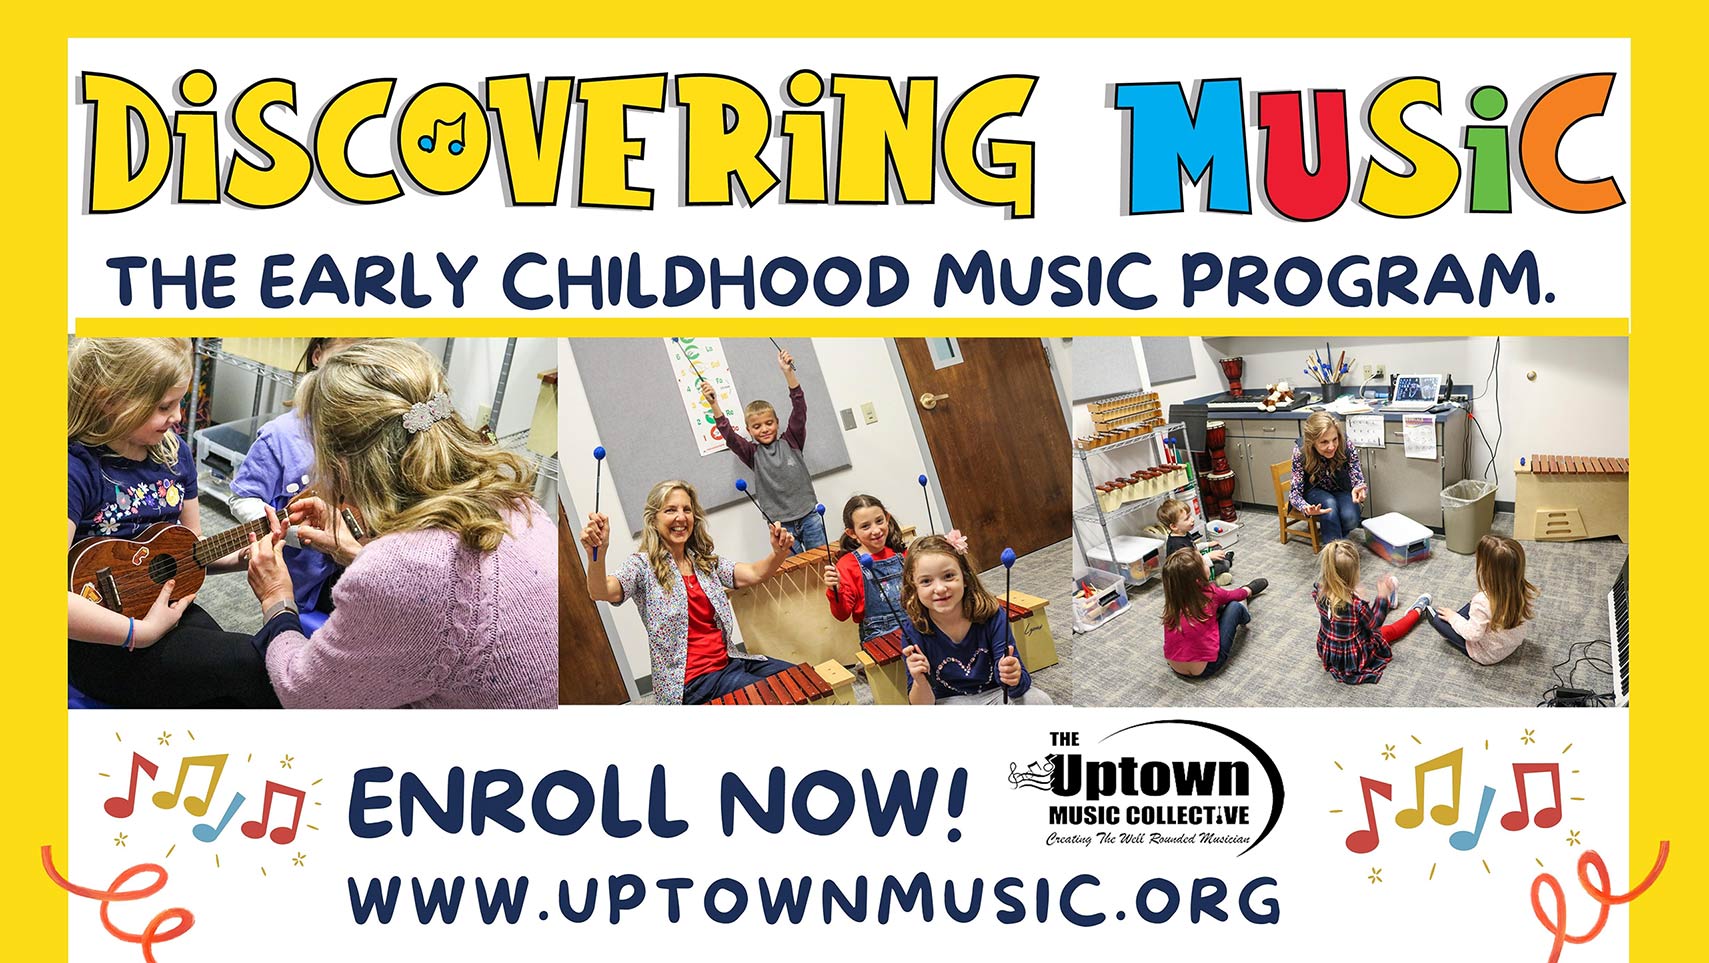 Enroll this Fall '22 with the Uptown Music Collective!